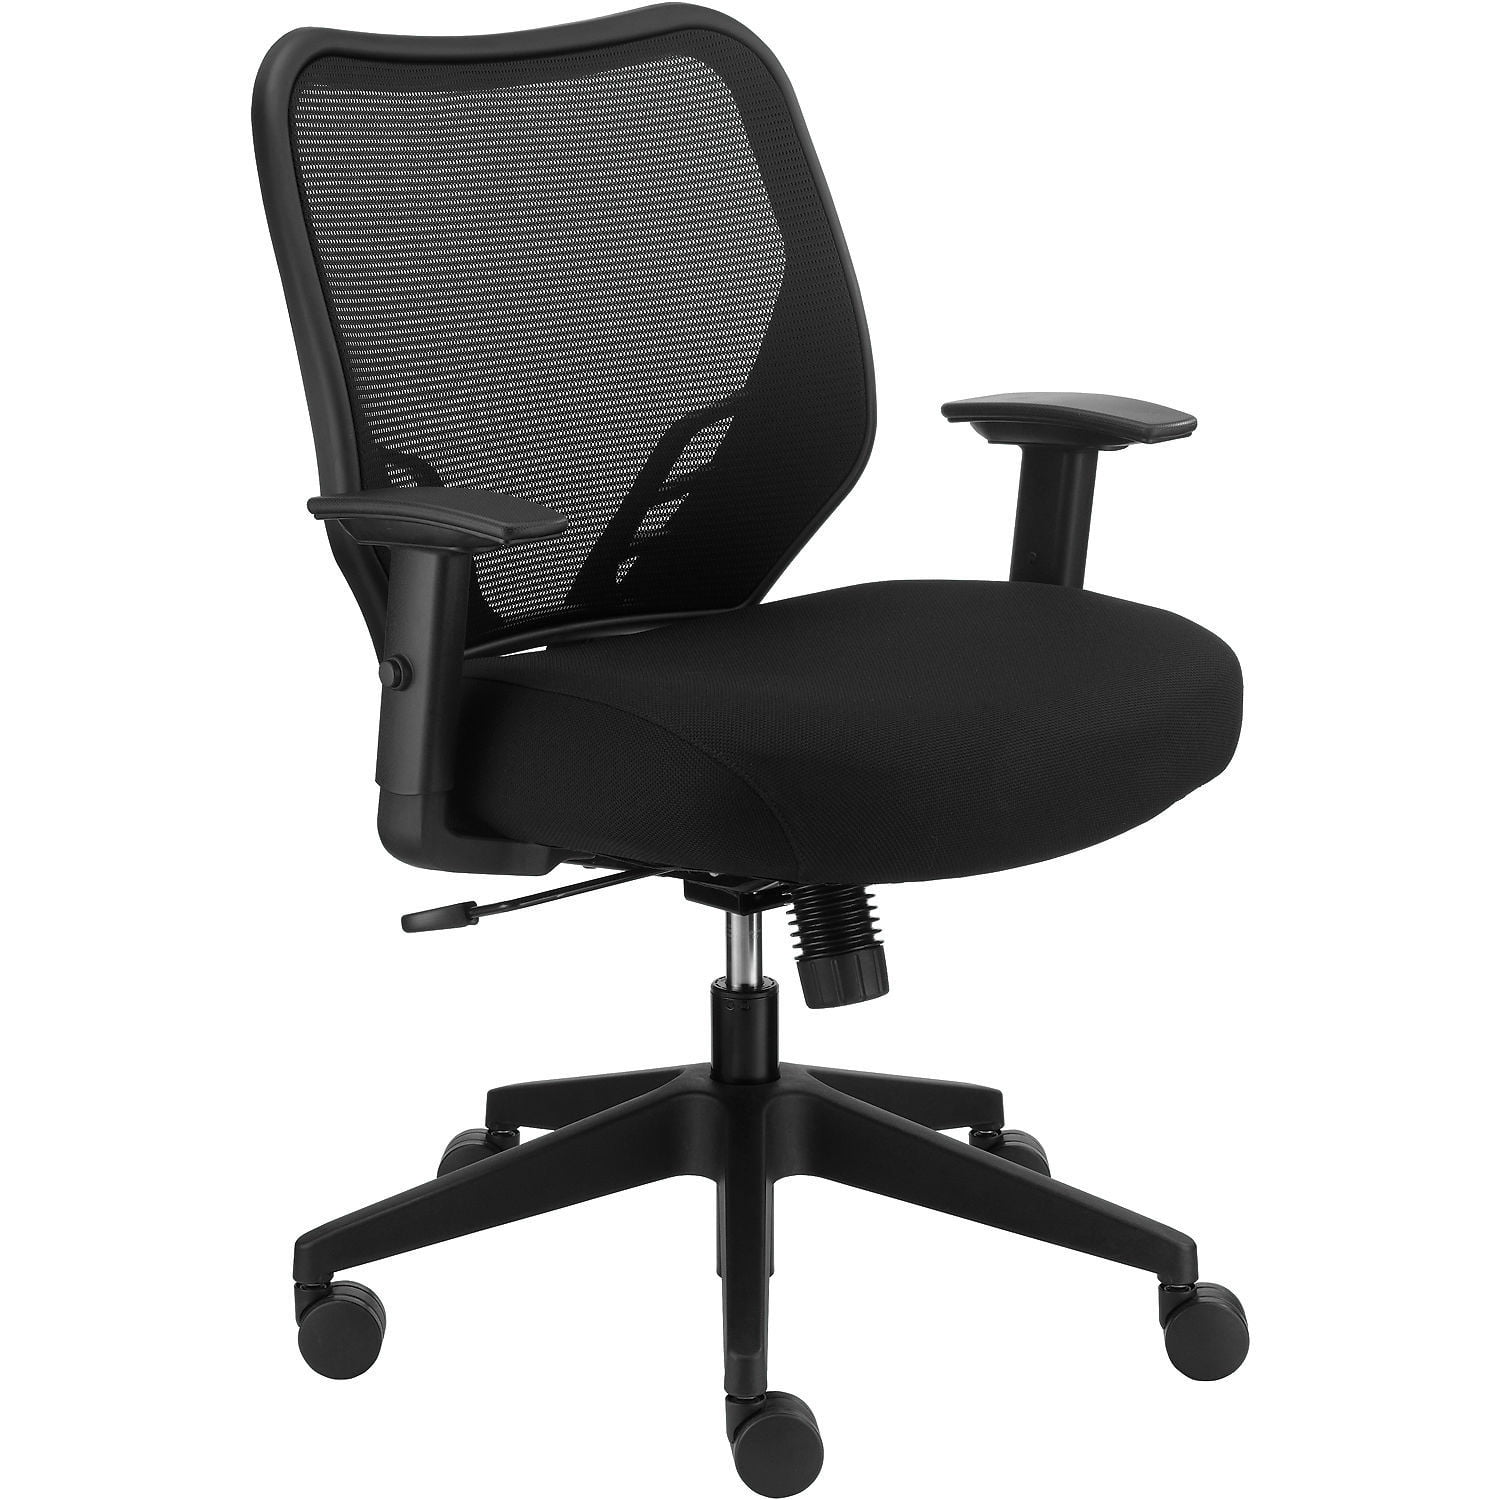 Details about   Global Airflow Mesh Back Leather Manager Chair Black 492943 9339BK 